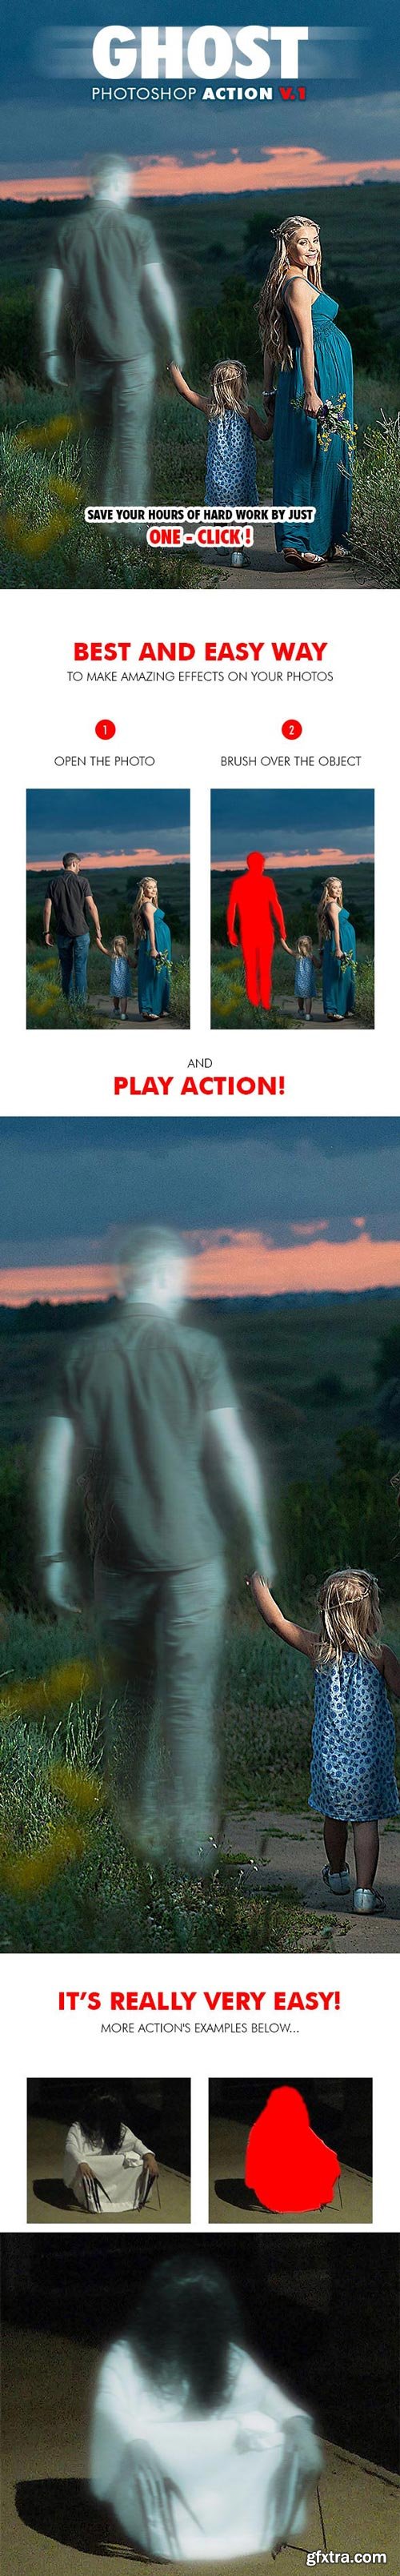 GraphicRiver - Ghost Photoshop Action V.1 - 19153447